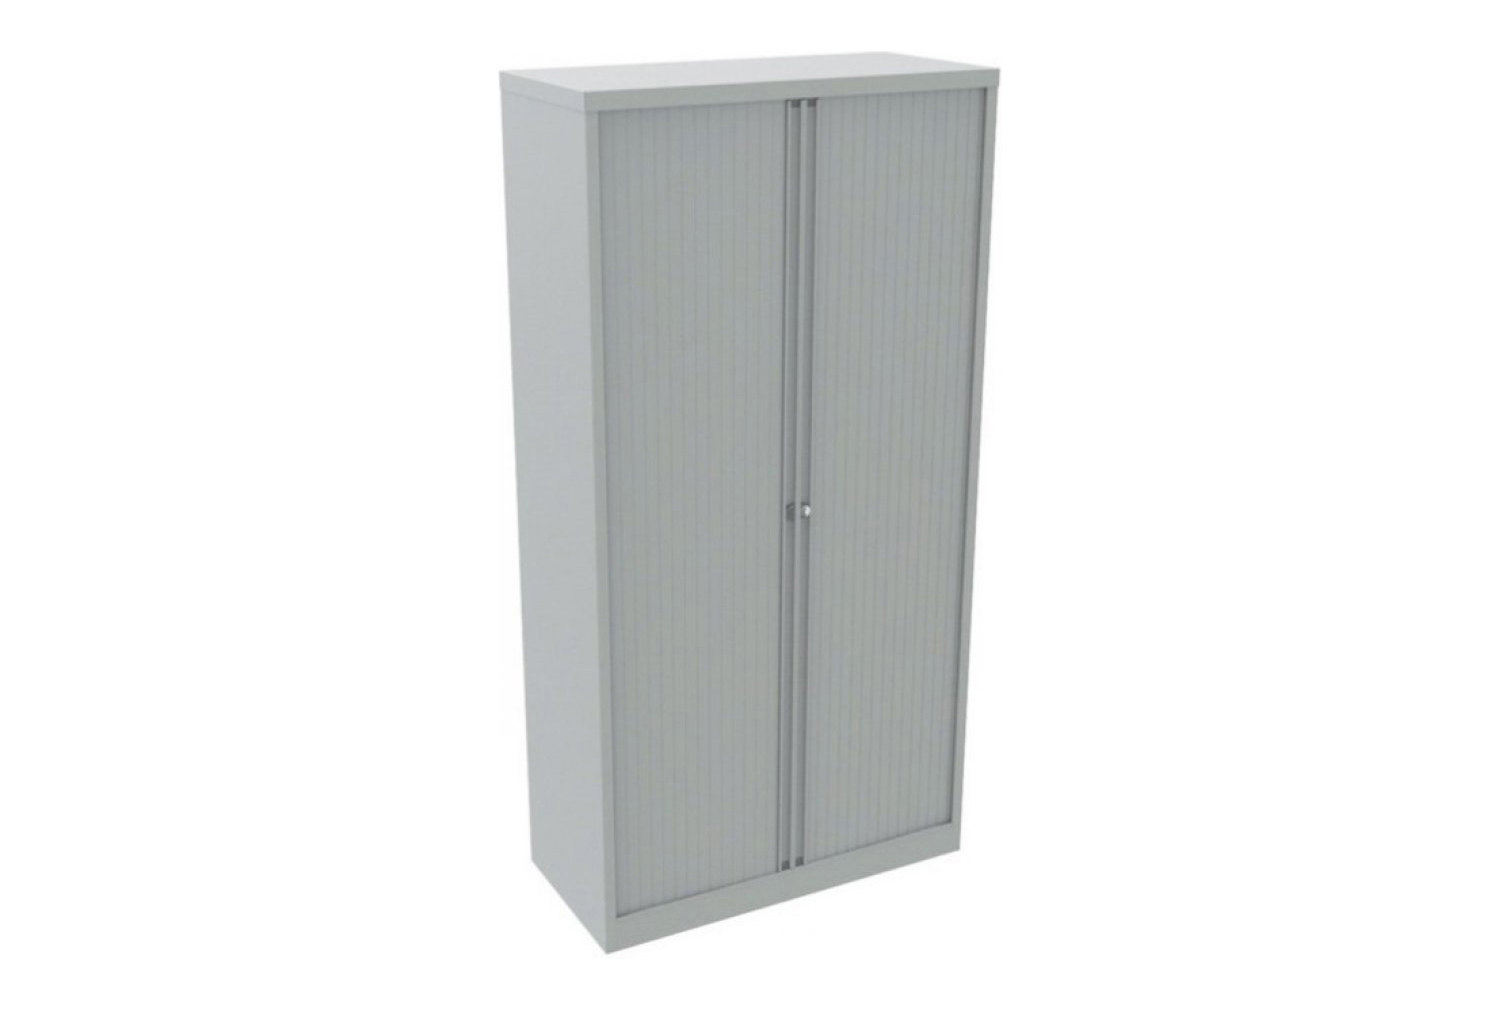 Contract Steel Tambour Office Cupboards, 100wx47dx197h (cm), Light Grey, Express Delivery